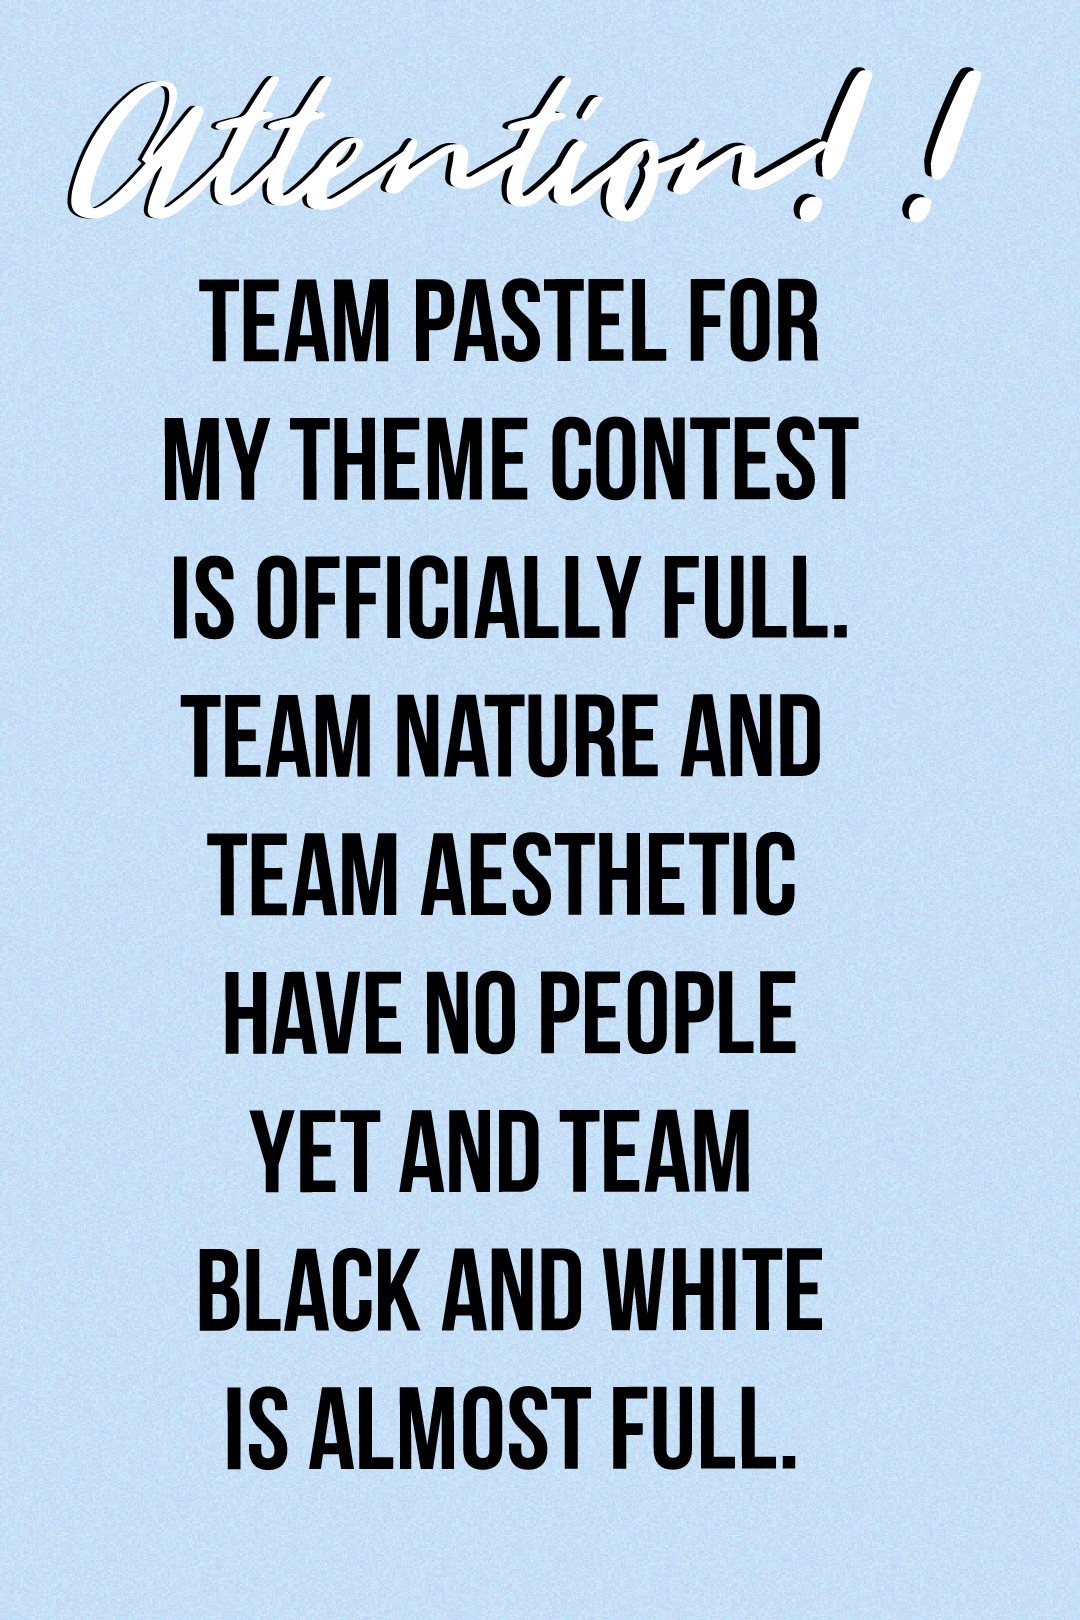 Join my theme contest!!